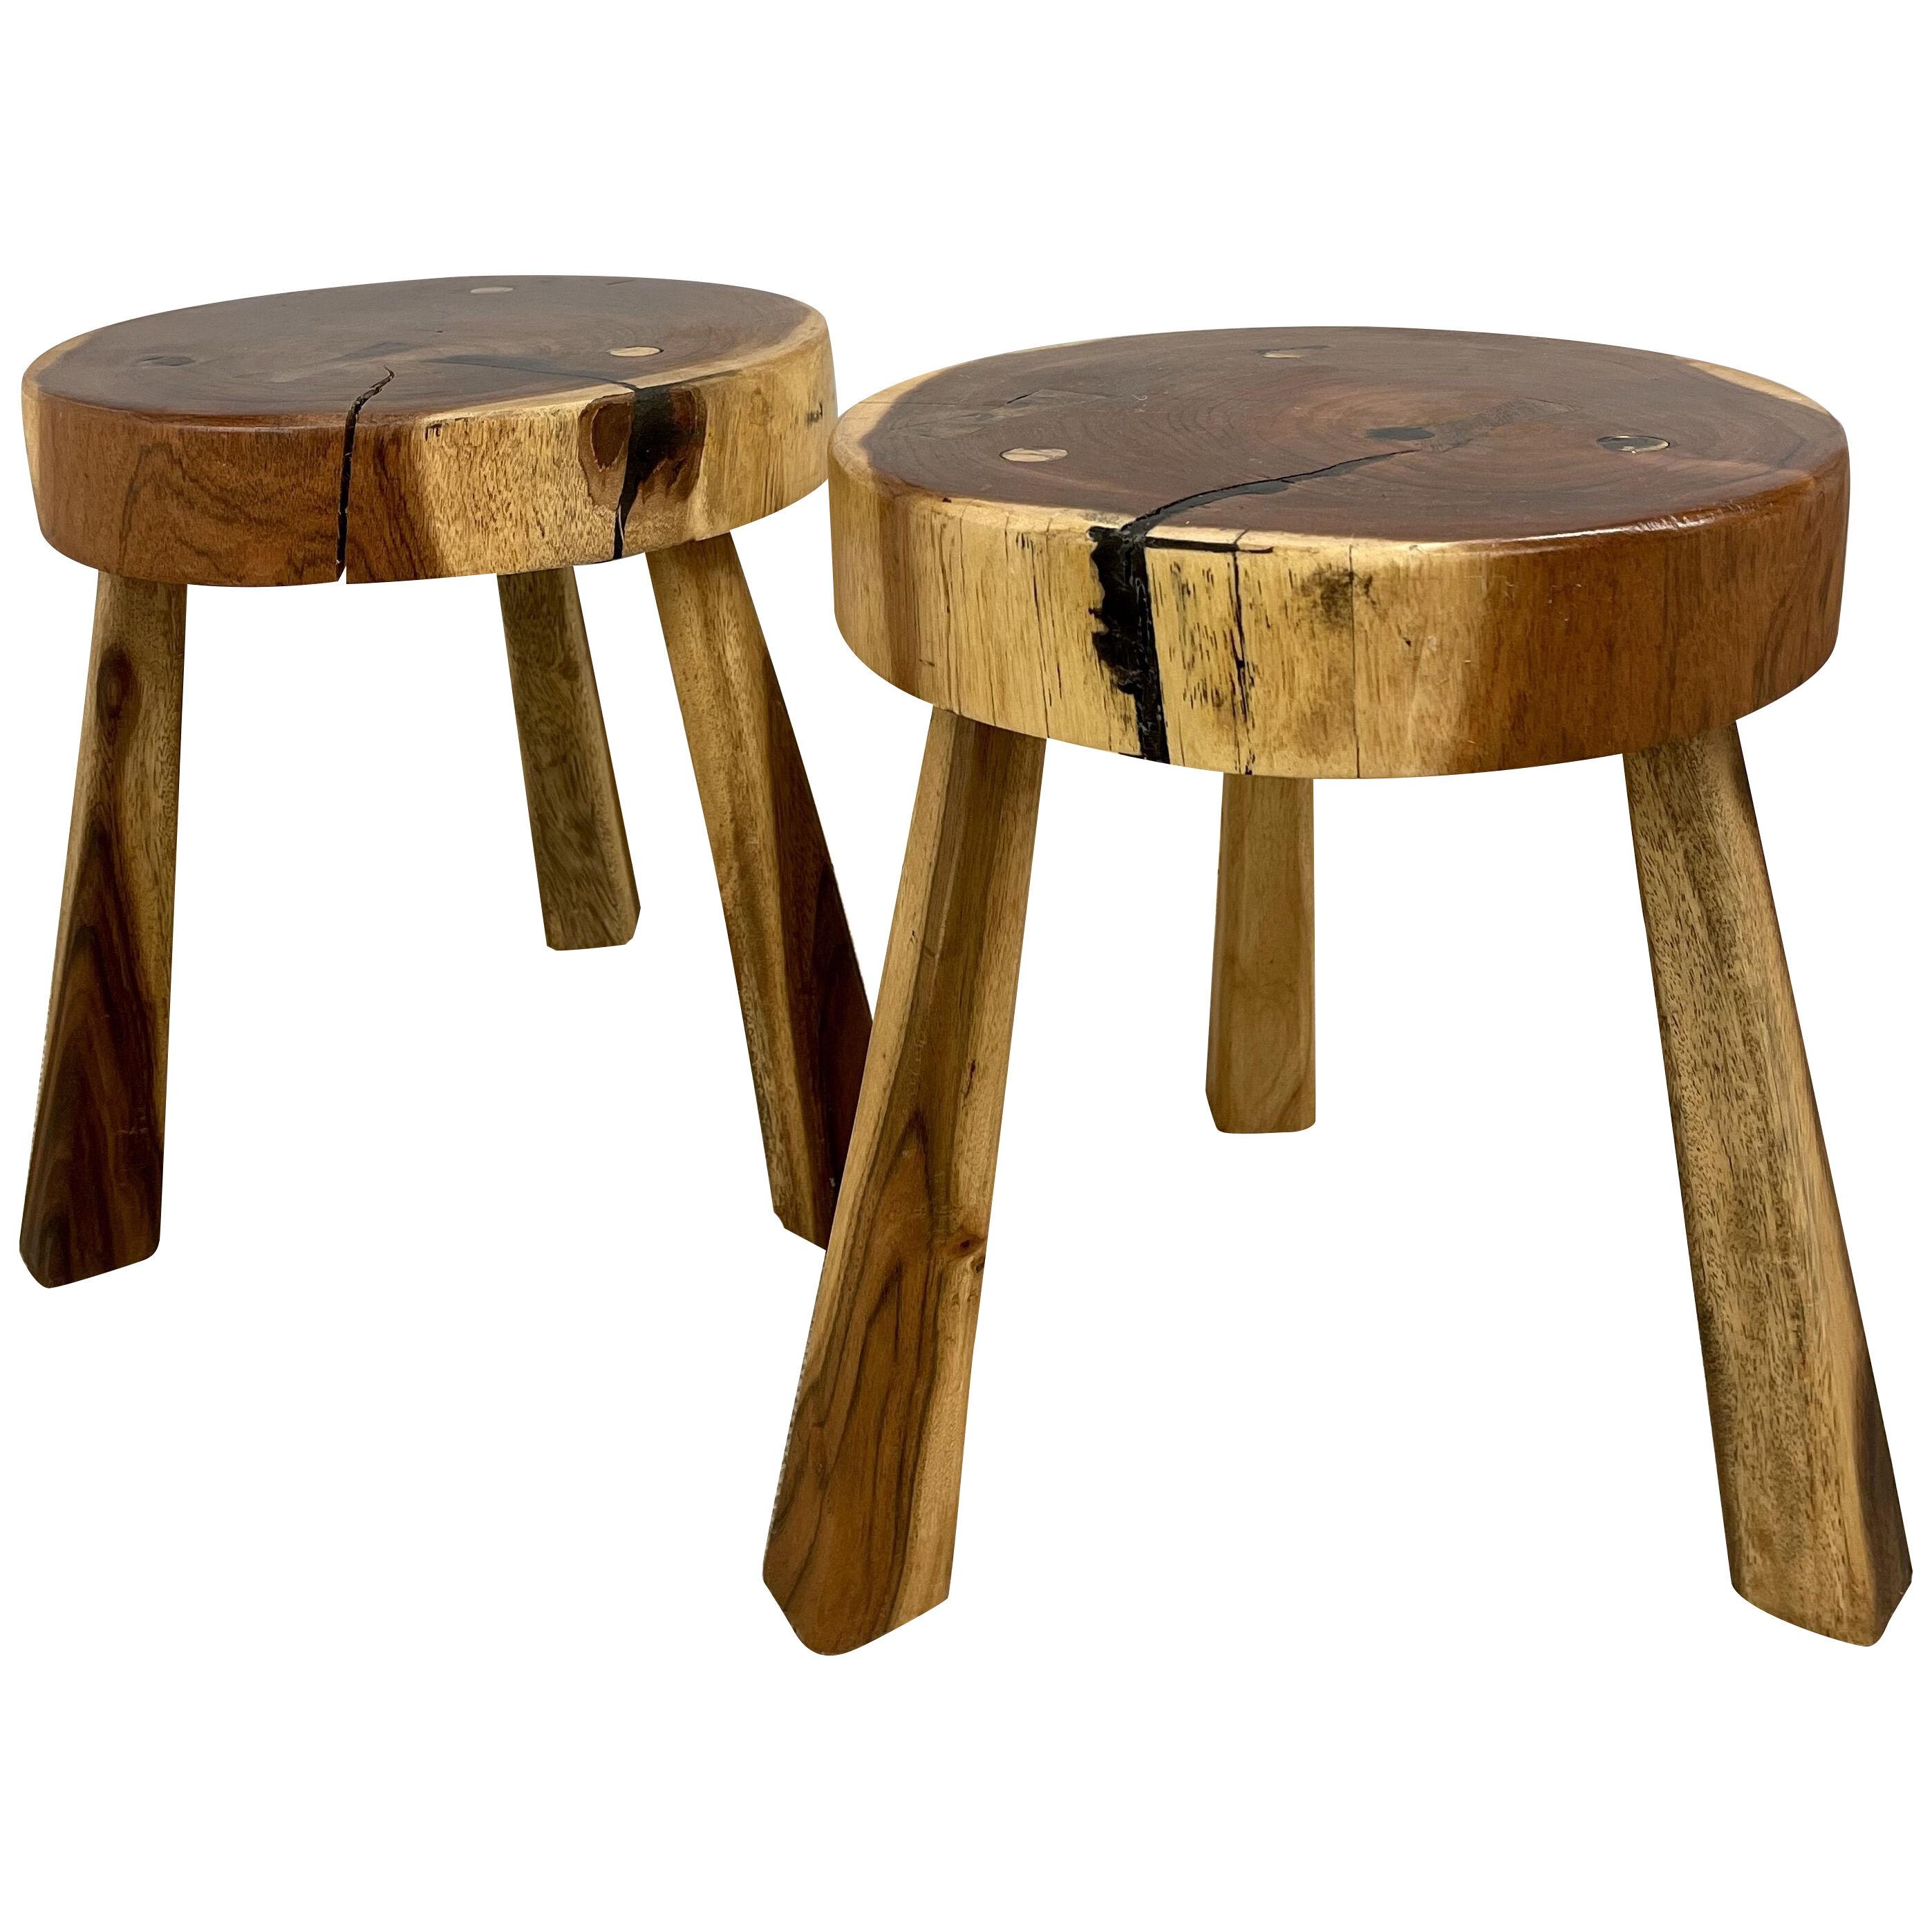 Pair Mid-Century Modern Nakashima Style Organic Wooden Two Stools / Side Tables